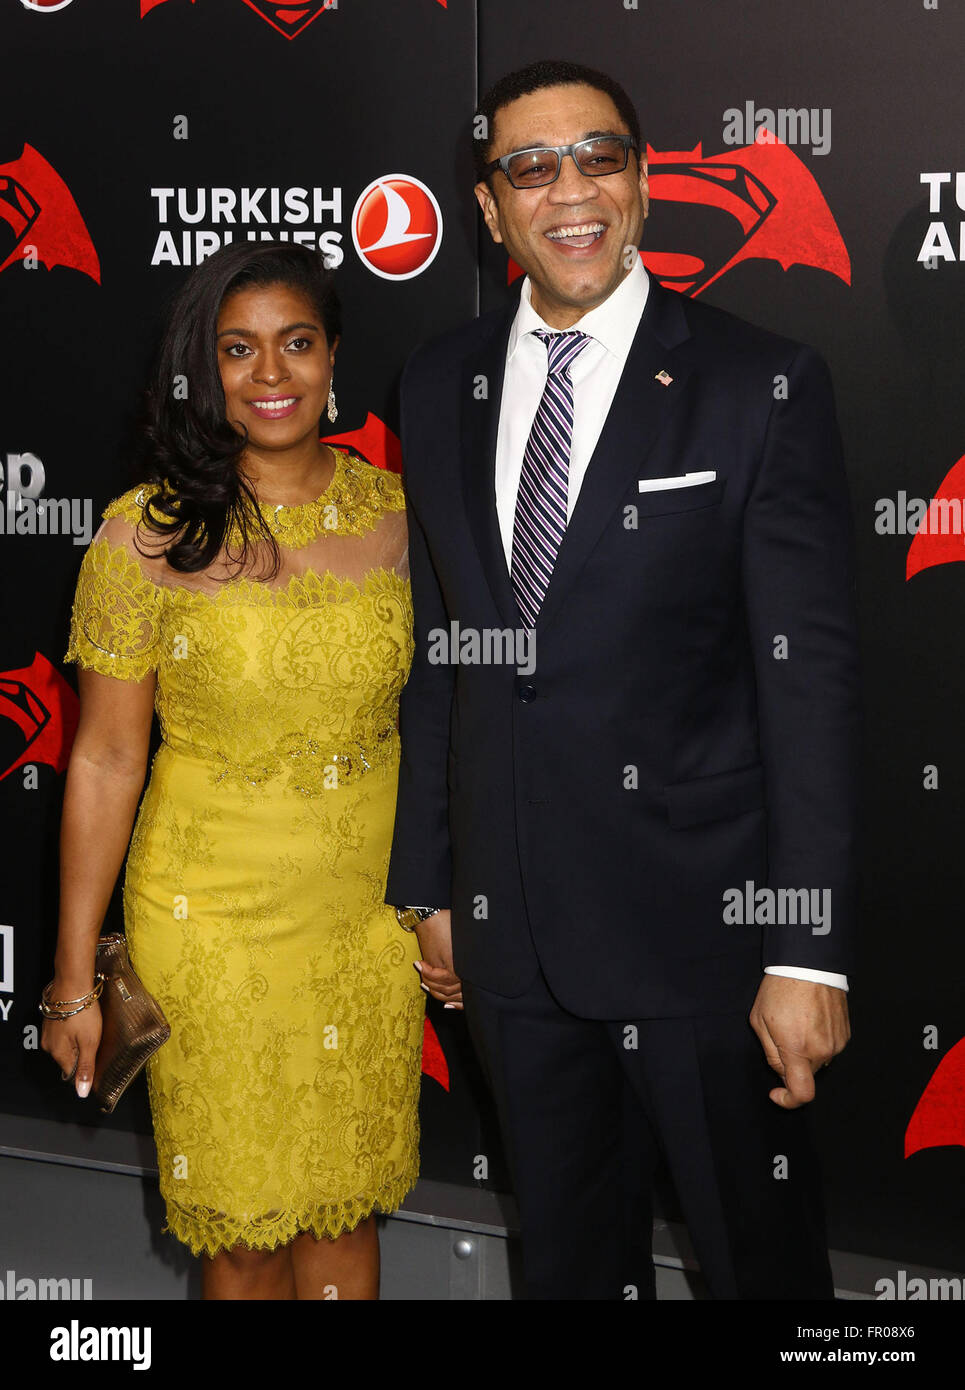 March 20, 2016 - New York, New York, U.S. - Actor HARRY LENNIX and his wife attend the New York premiere of 'Batman v Superman: Dawn of Justice' held at Radio City Music Hall. (Credit Image: © Nancy Kaszerman via ZUMA Wire) Stock Photo